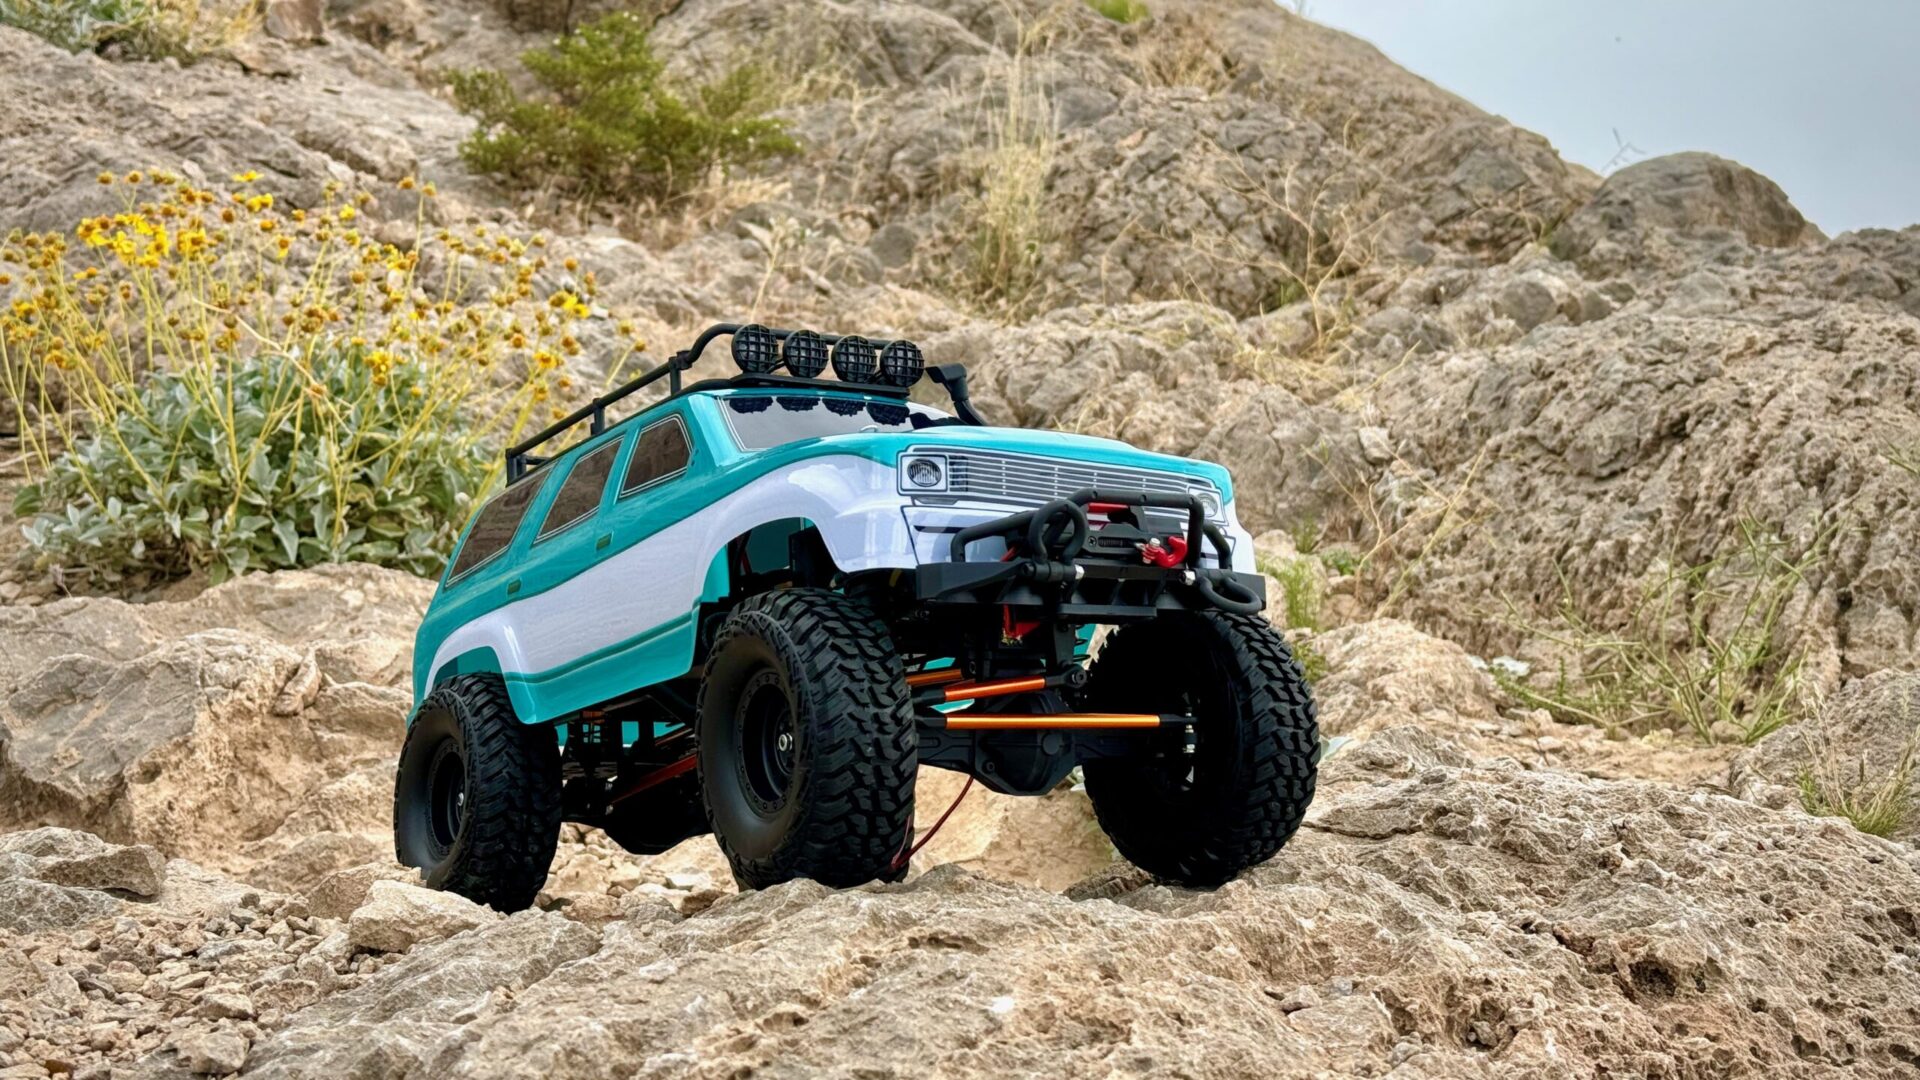 Laegendary Grondo 1:10 Scale RC Rock Crawler Hands-On Review: Hobby-Quality At An Online Price